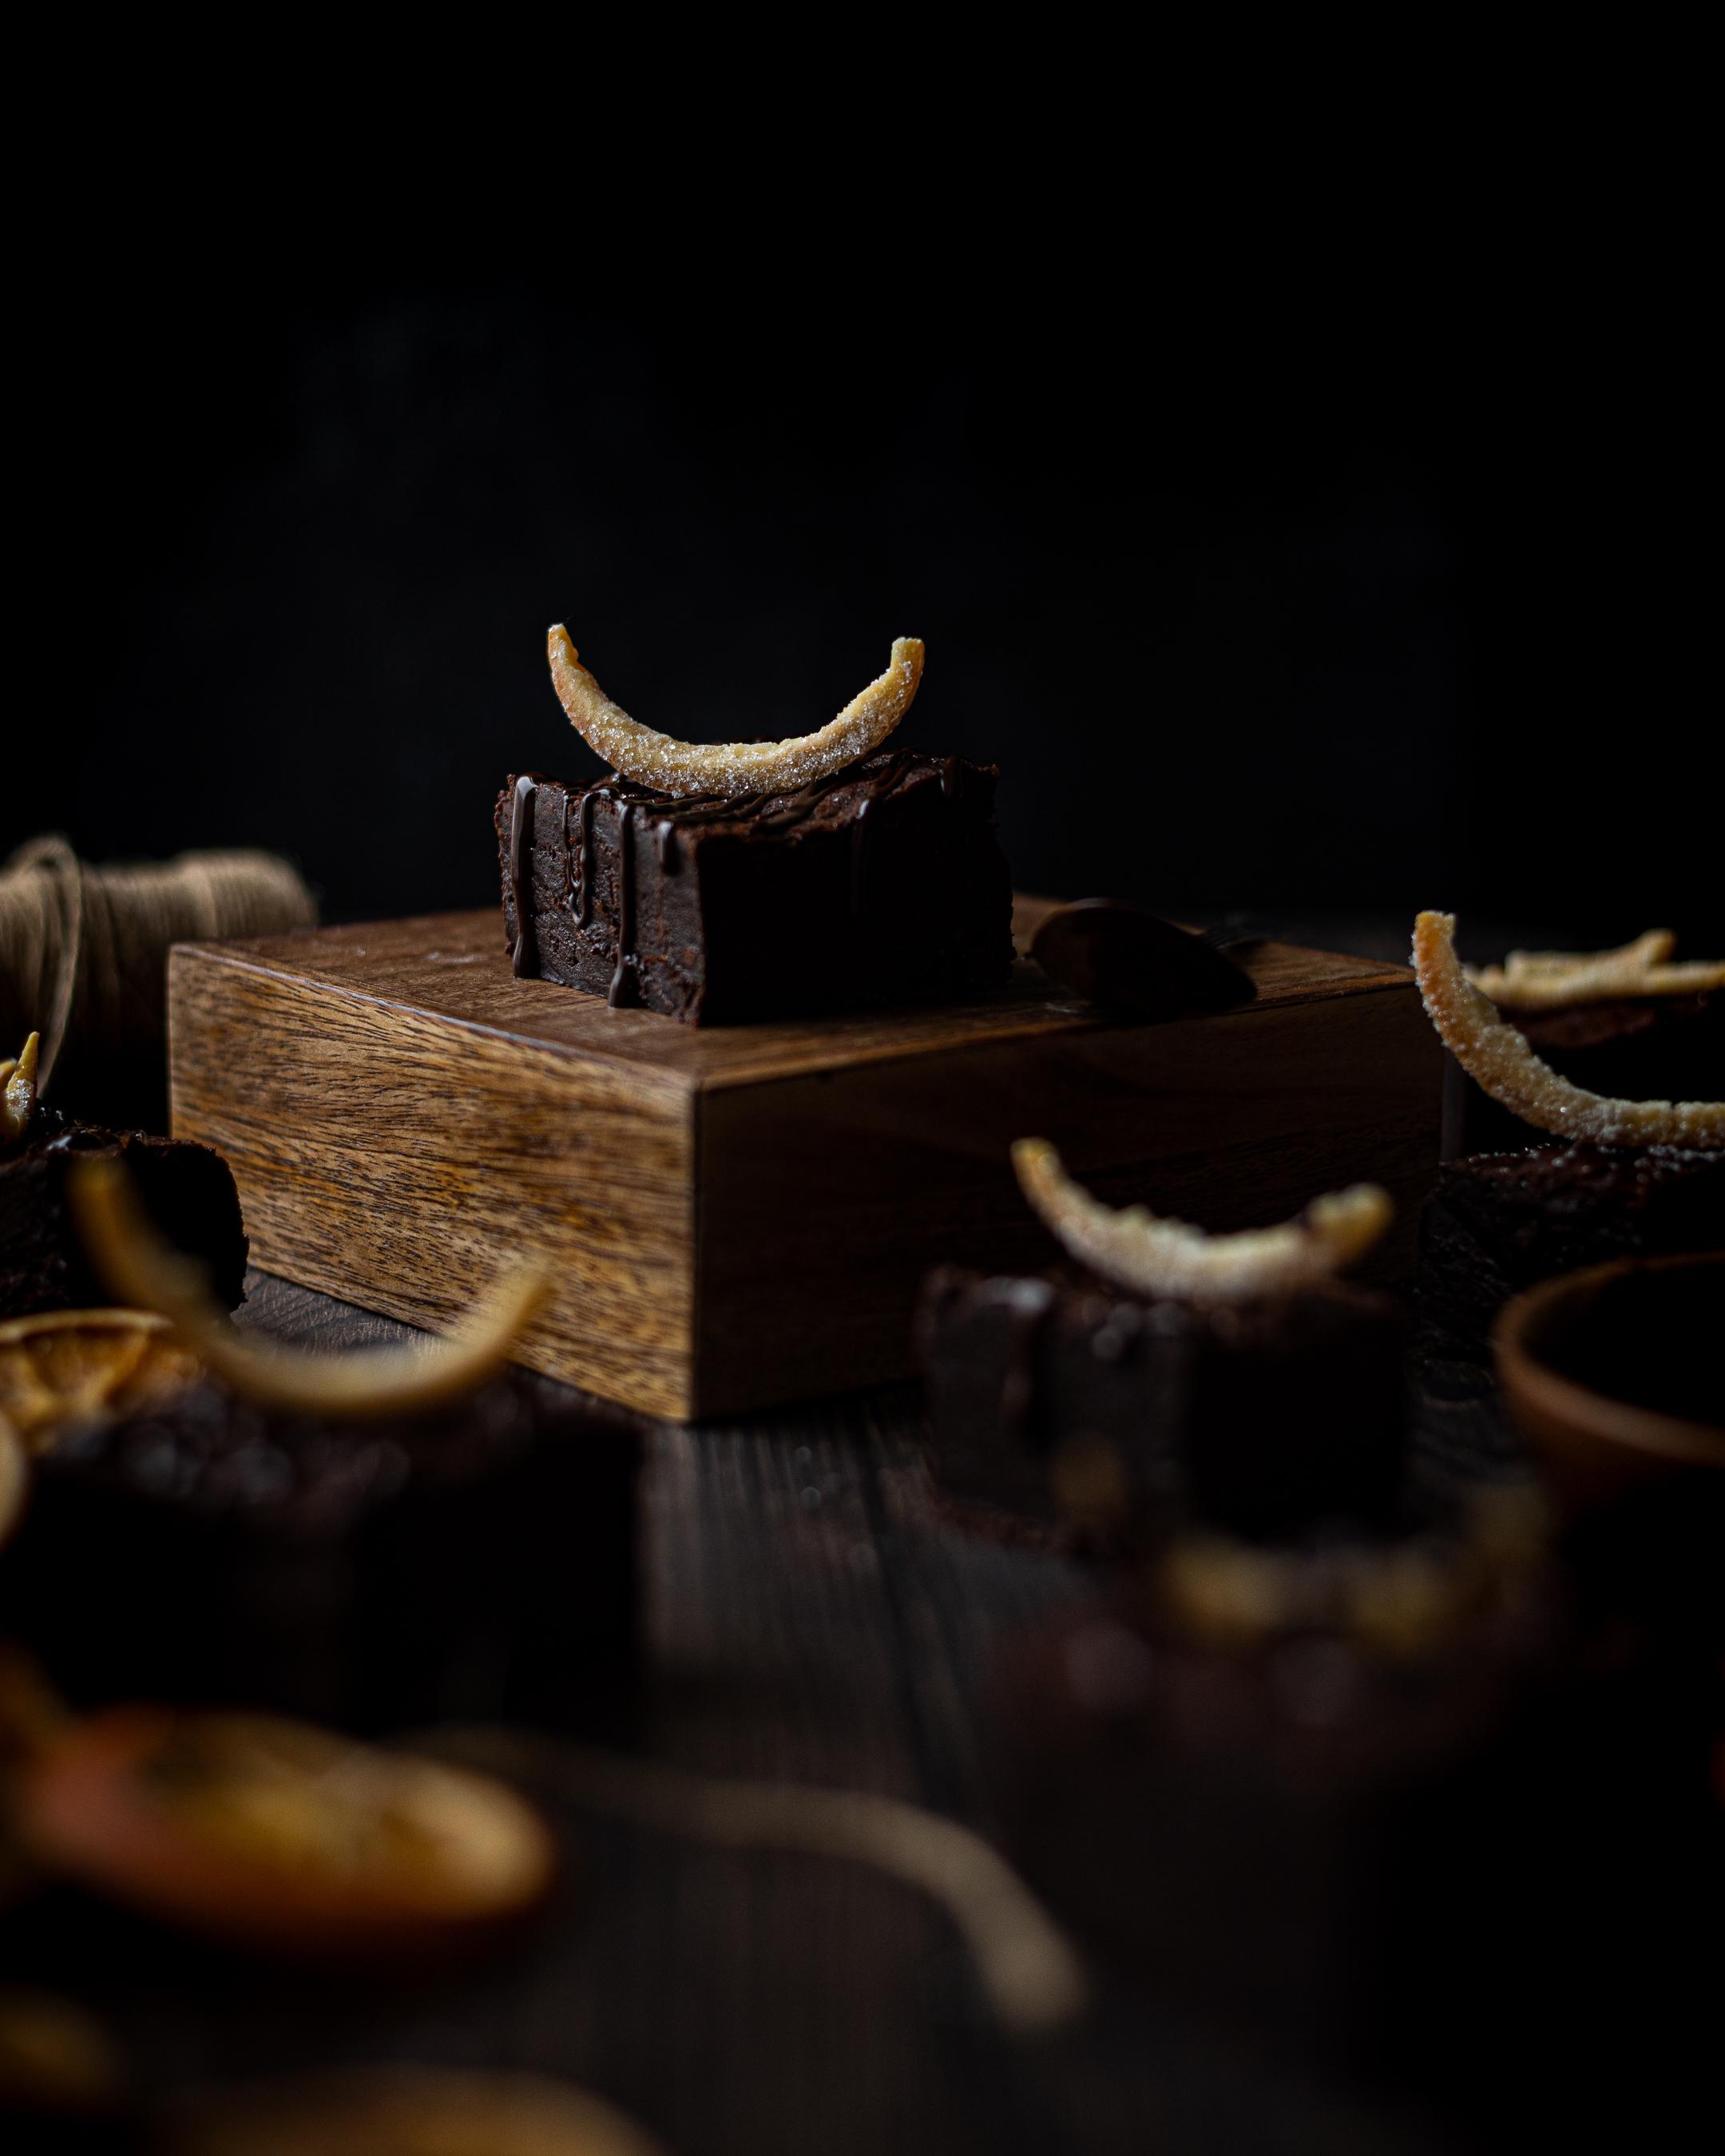 a chocolate orange brownie on a wooden platform, topped with a candied orange crown, surrounded by other chocolate orange brownies and dried oranges in the foreground